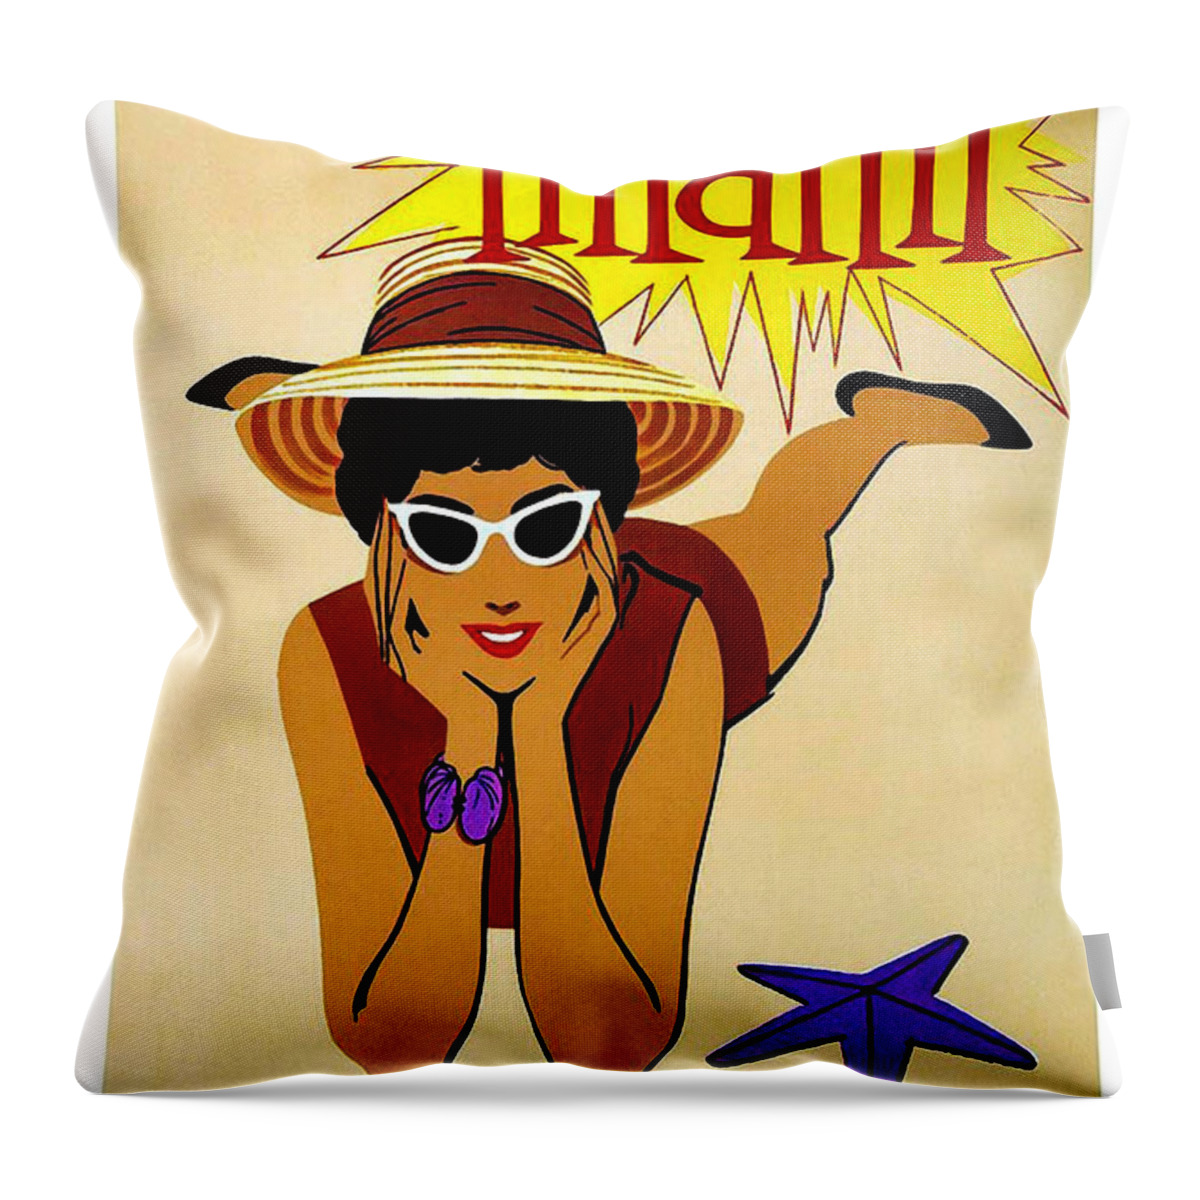 Miami Throw Pillow featuring the painting Miami, sunbathing, woman, vintage travel poster by Long Shot